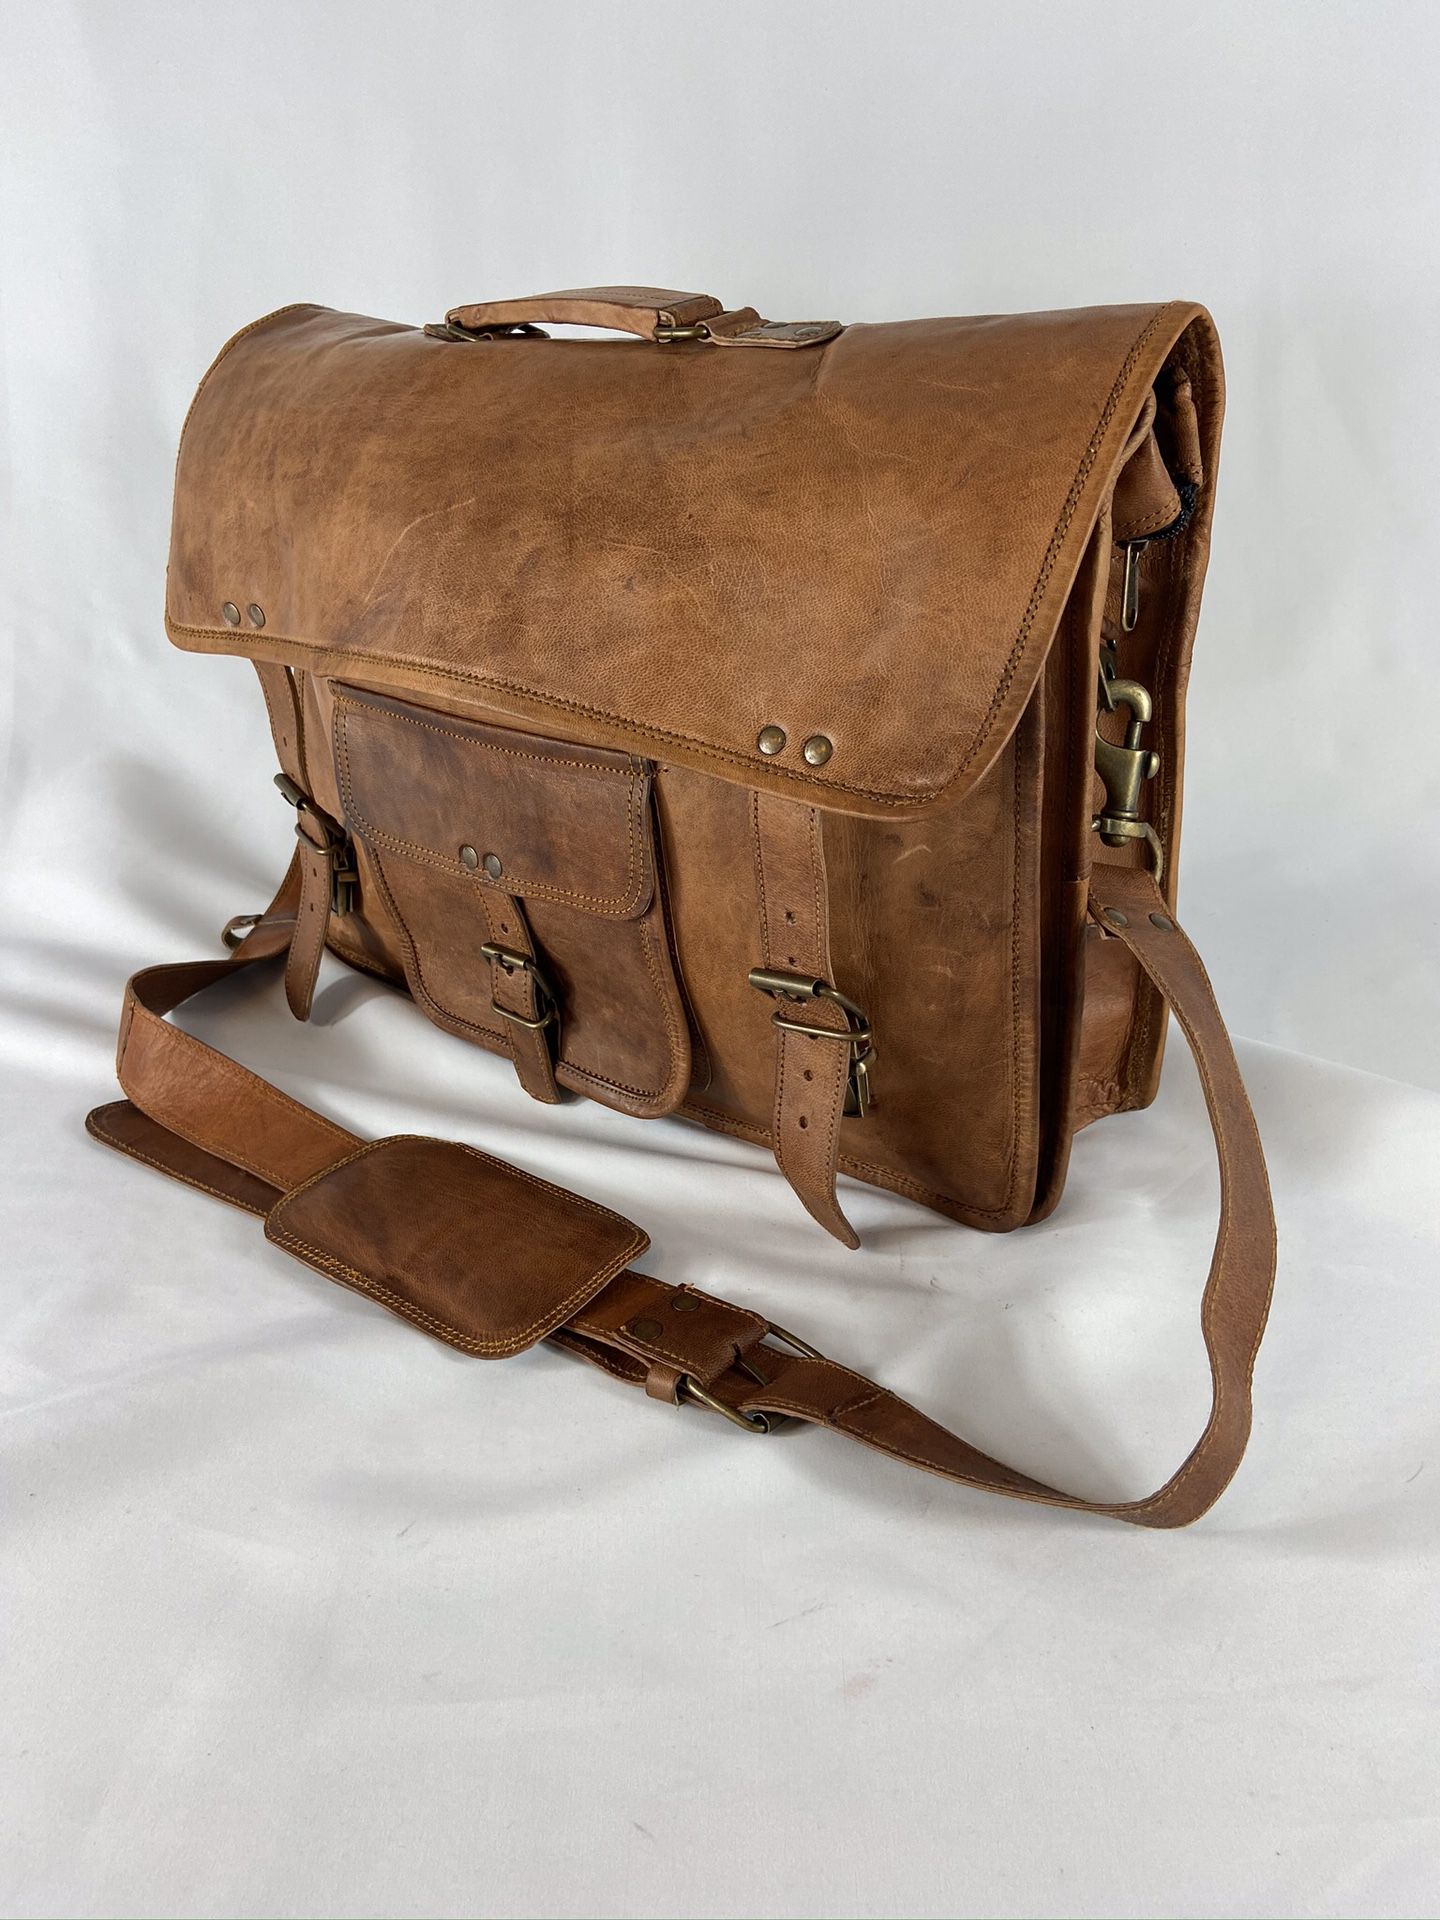 Very nice Komals Passion Leather Messenger bag, briefcase.